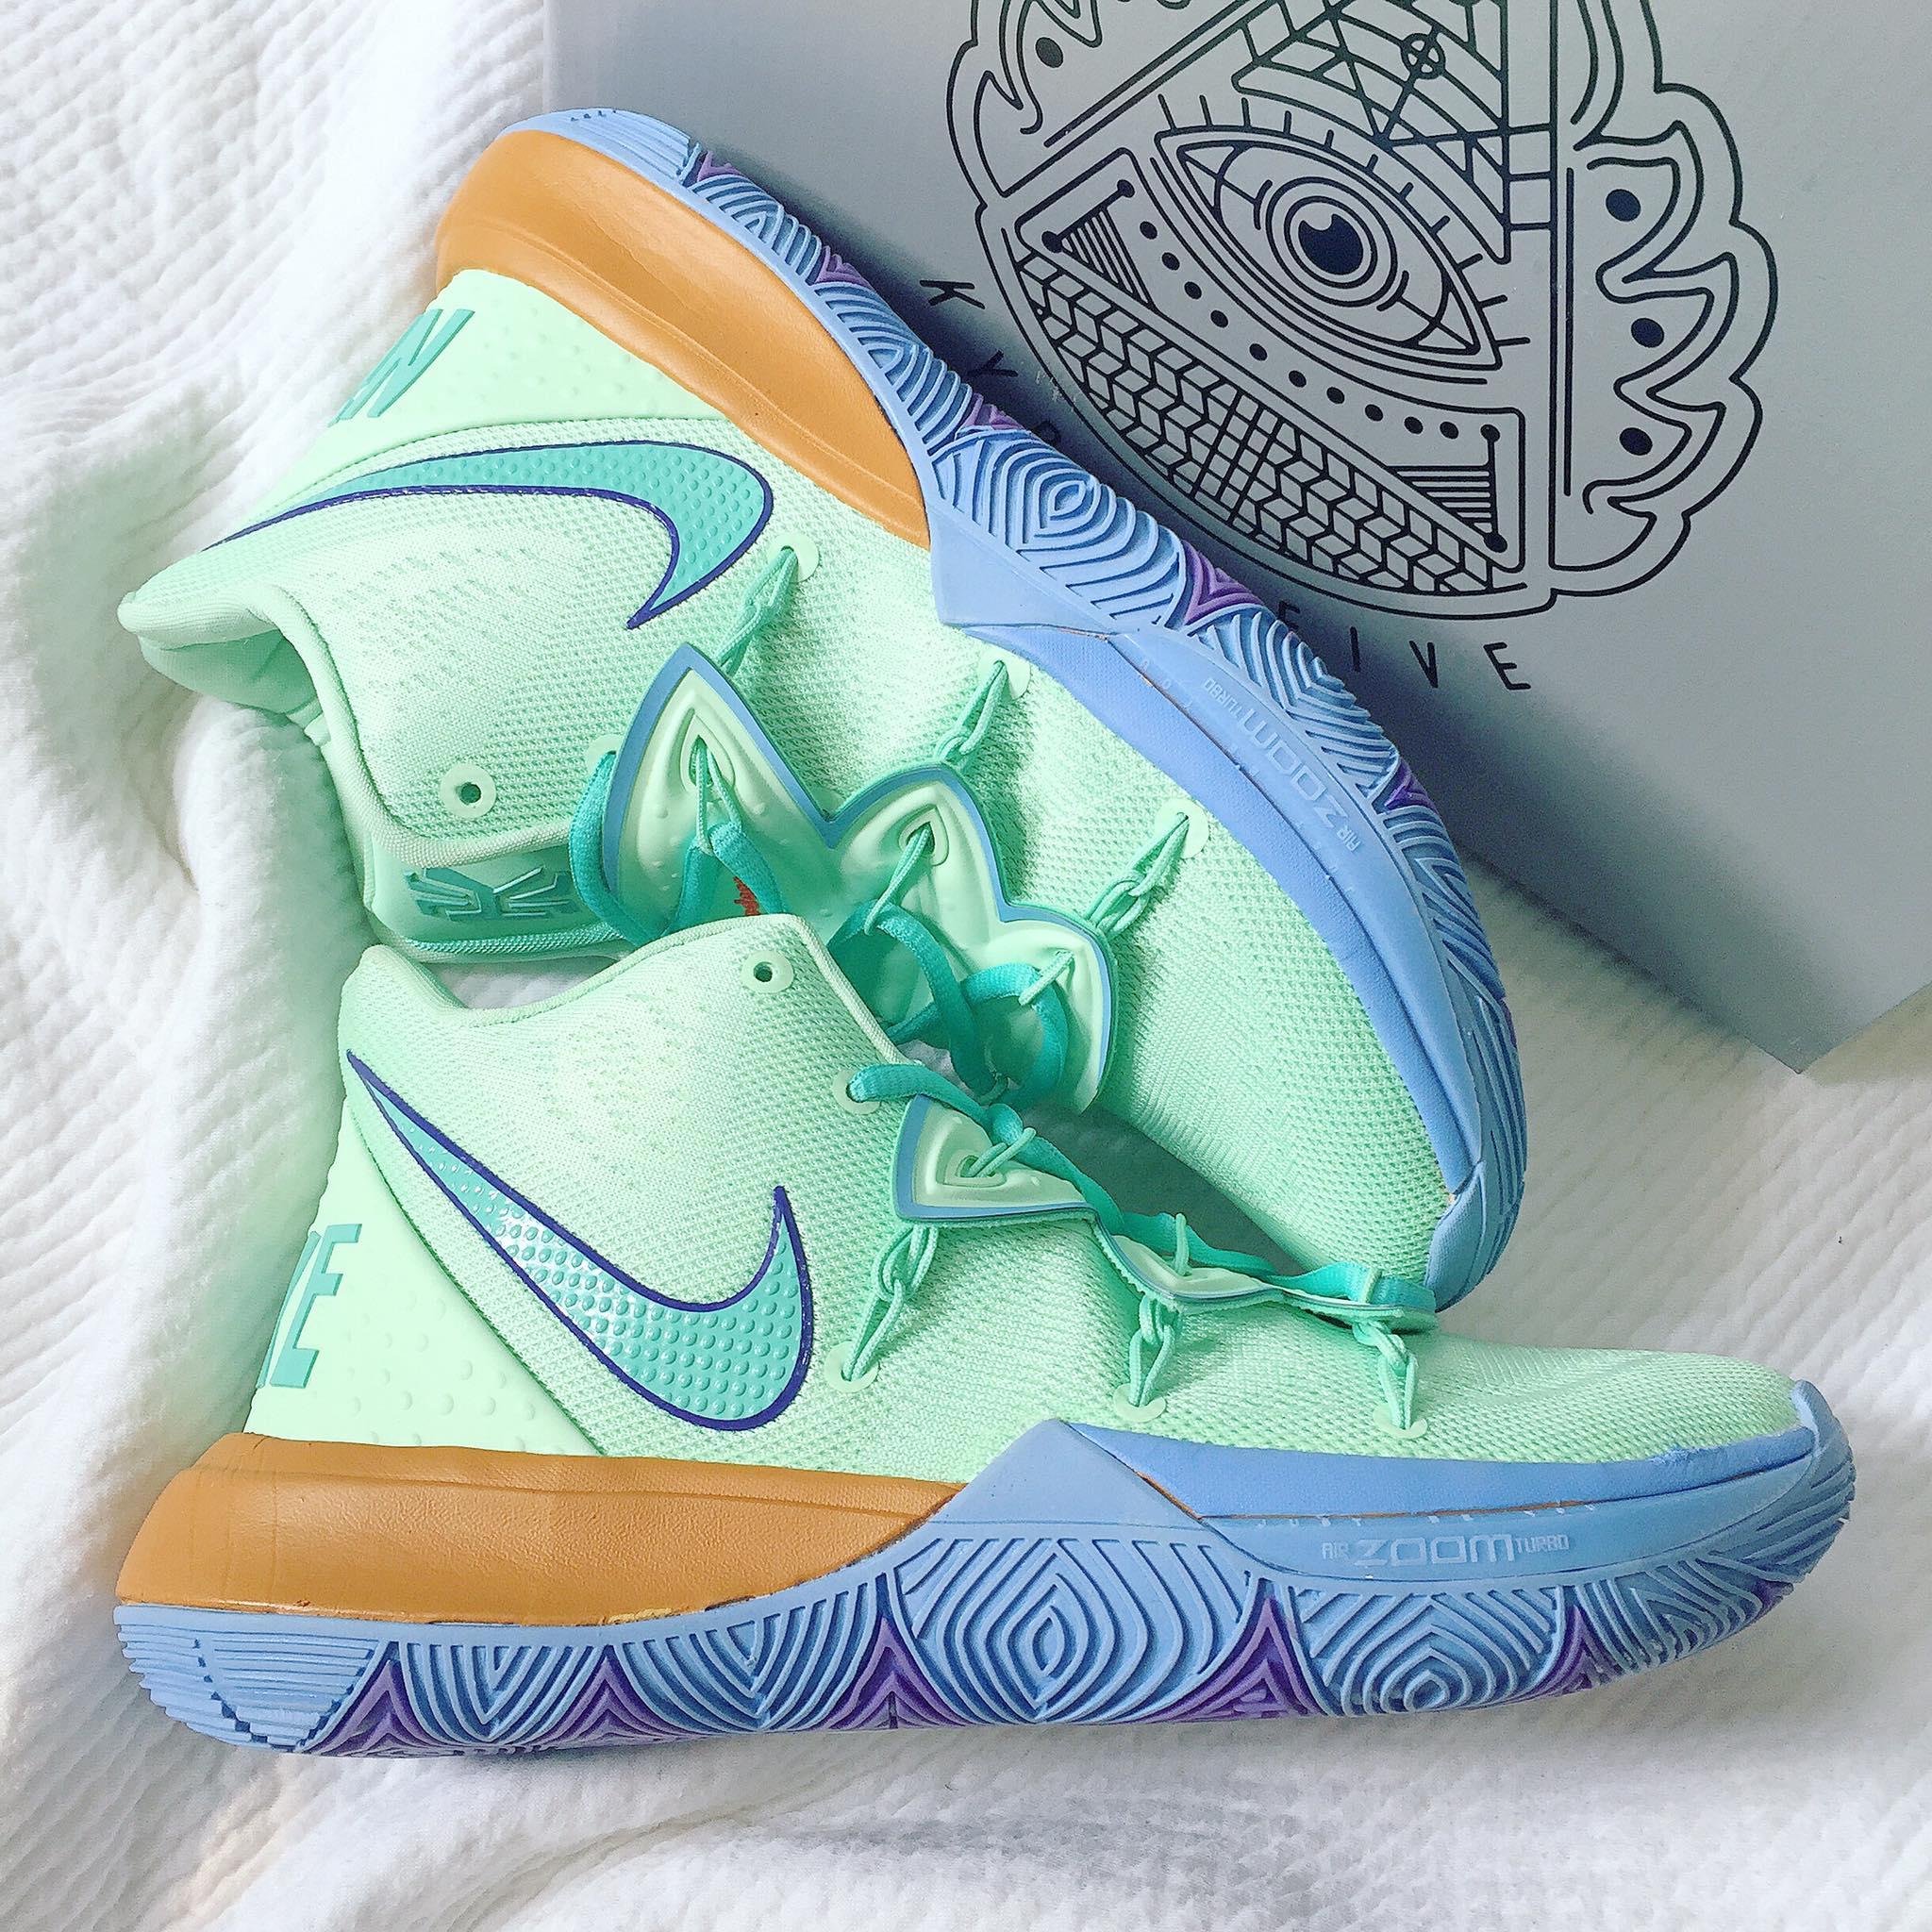 kyrie 5 squidward for sale